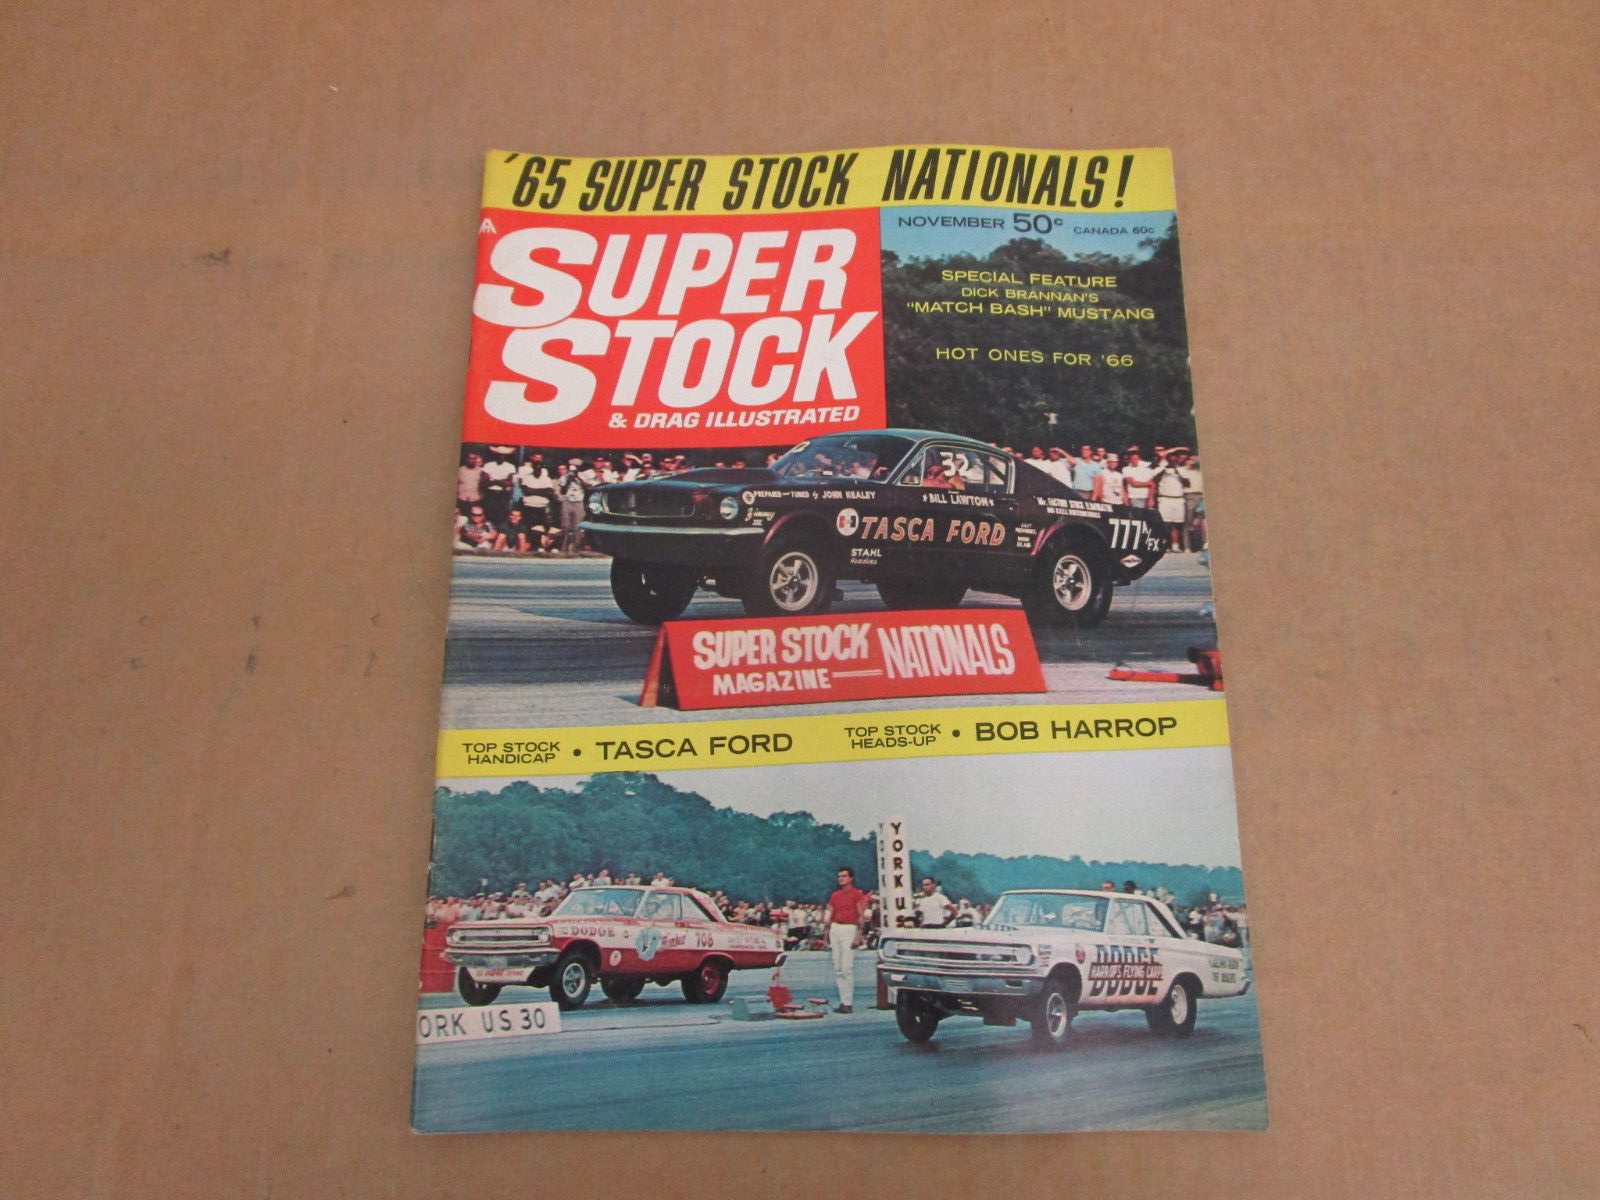 SUPER STOCK & DRAG ILL magazine November 1965 Mustang Dodge Charger race racing